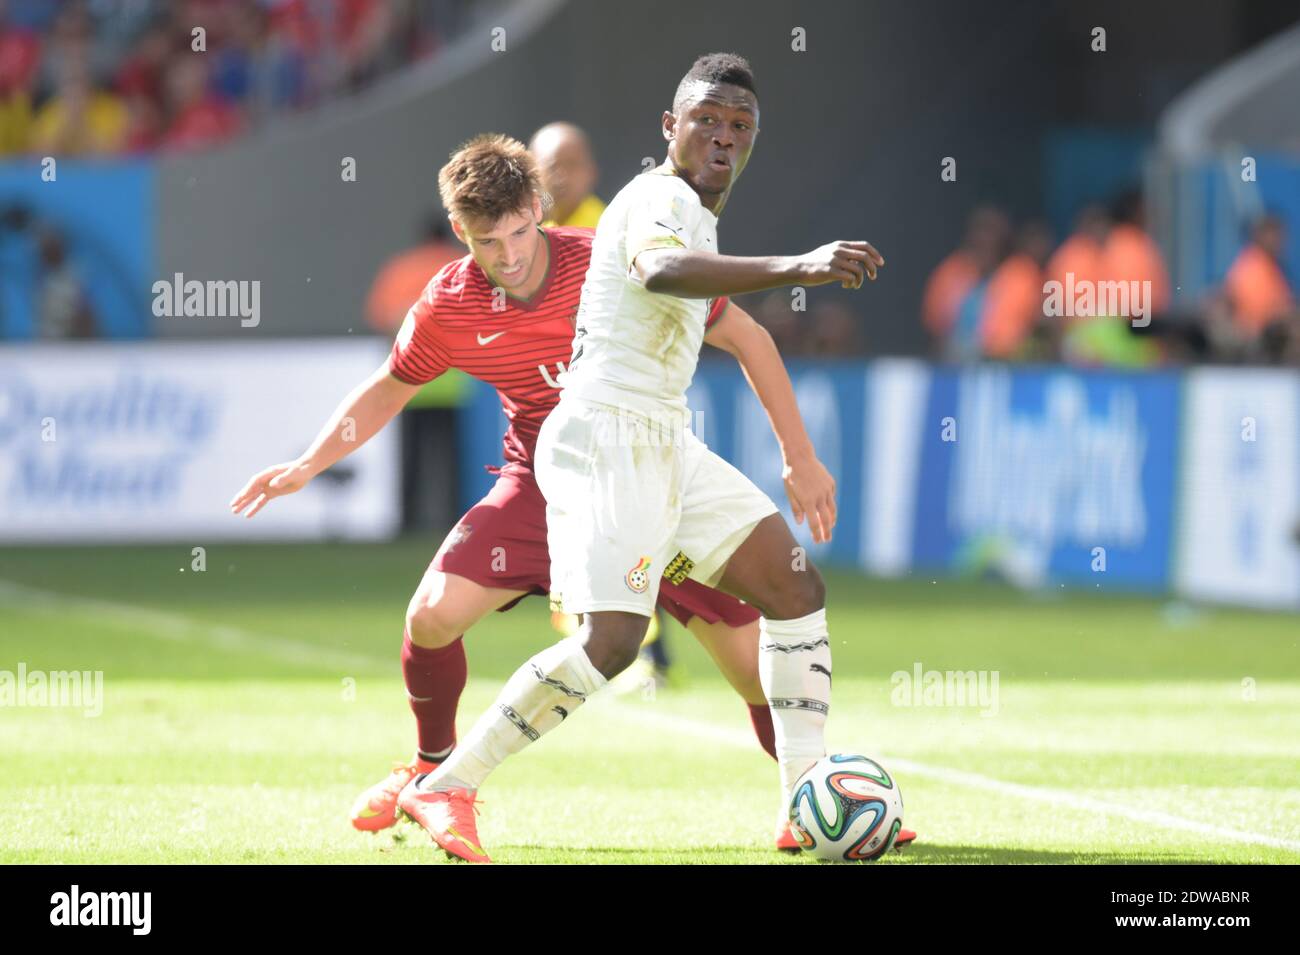 Ghana's Abdul Majeed Waris battling Portugal's Miguel Veloso during Soccer World Cup 2014 First round Group G match Ghana v Portugal at National Stadium, Brasilia, Brazil on June 26, 2014. Portugal won 2-1. Photo by Henri Szwarc/ABACAPRESS.COM Stock Photo